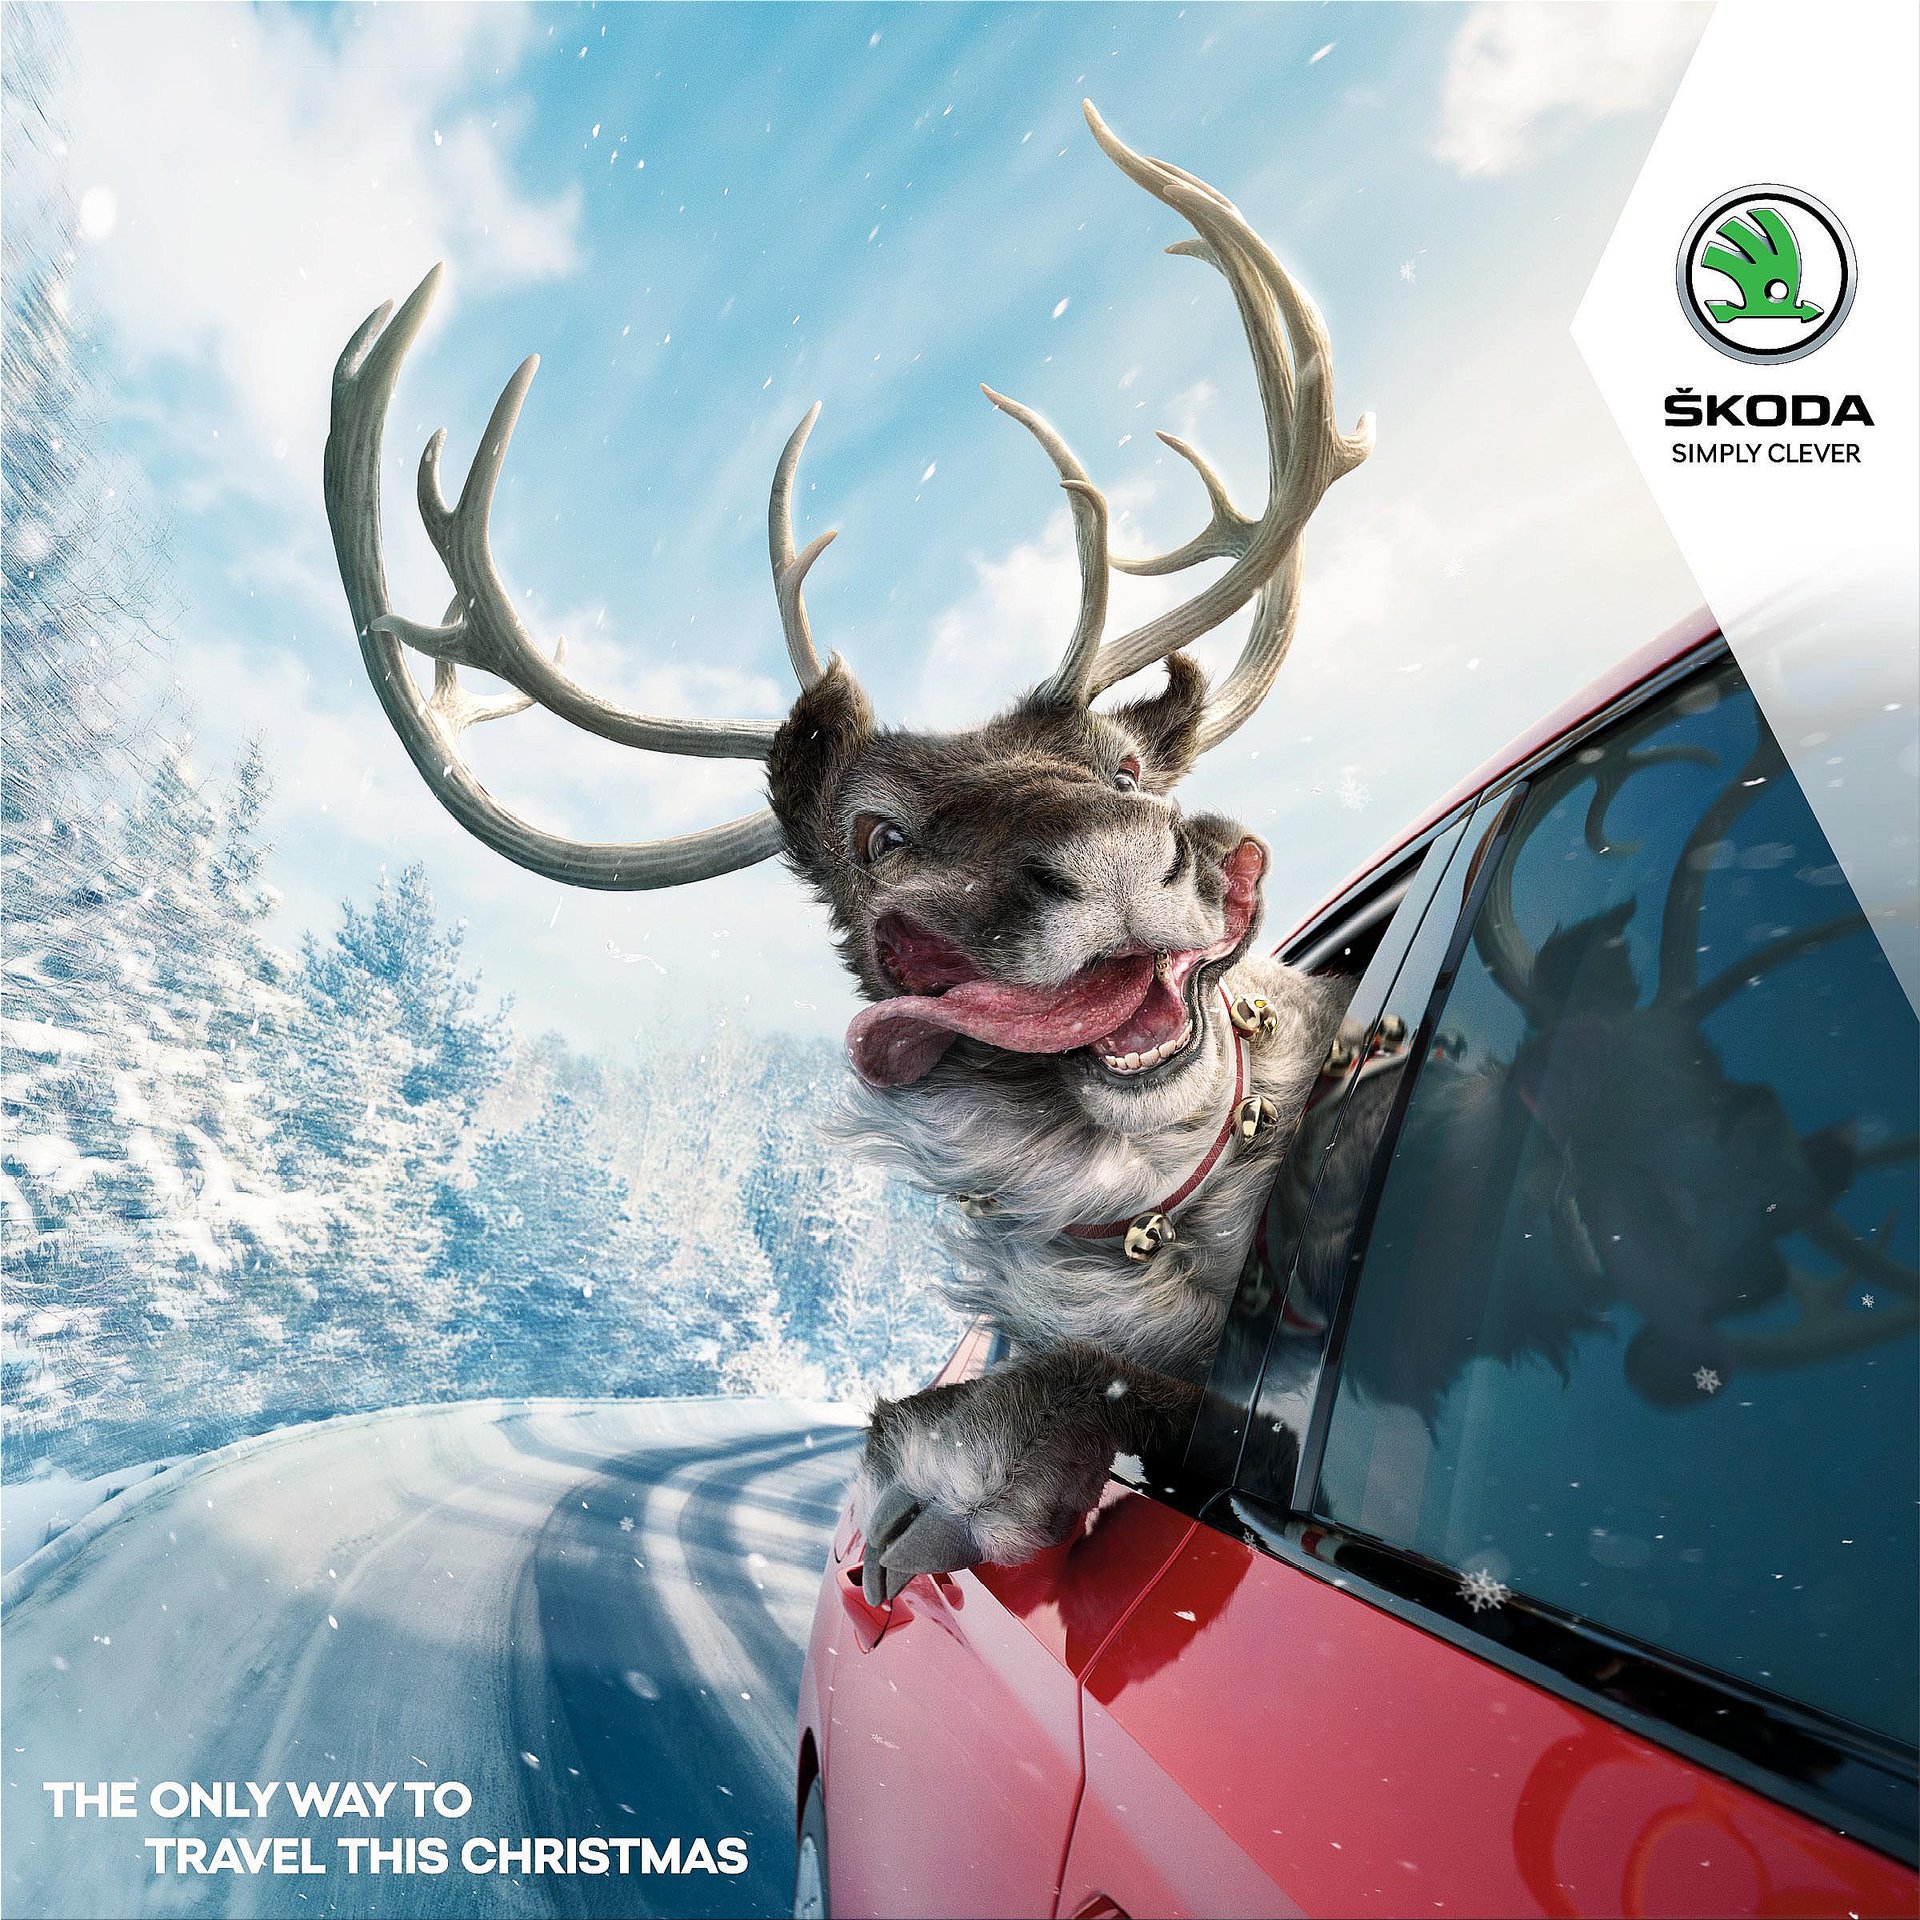 Skoda Trying To Stay 'Simply Clever' This Winter